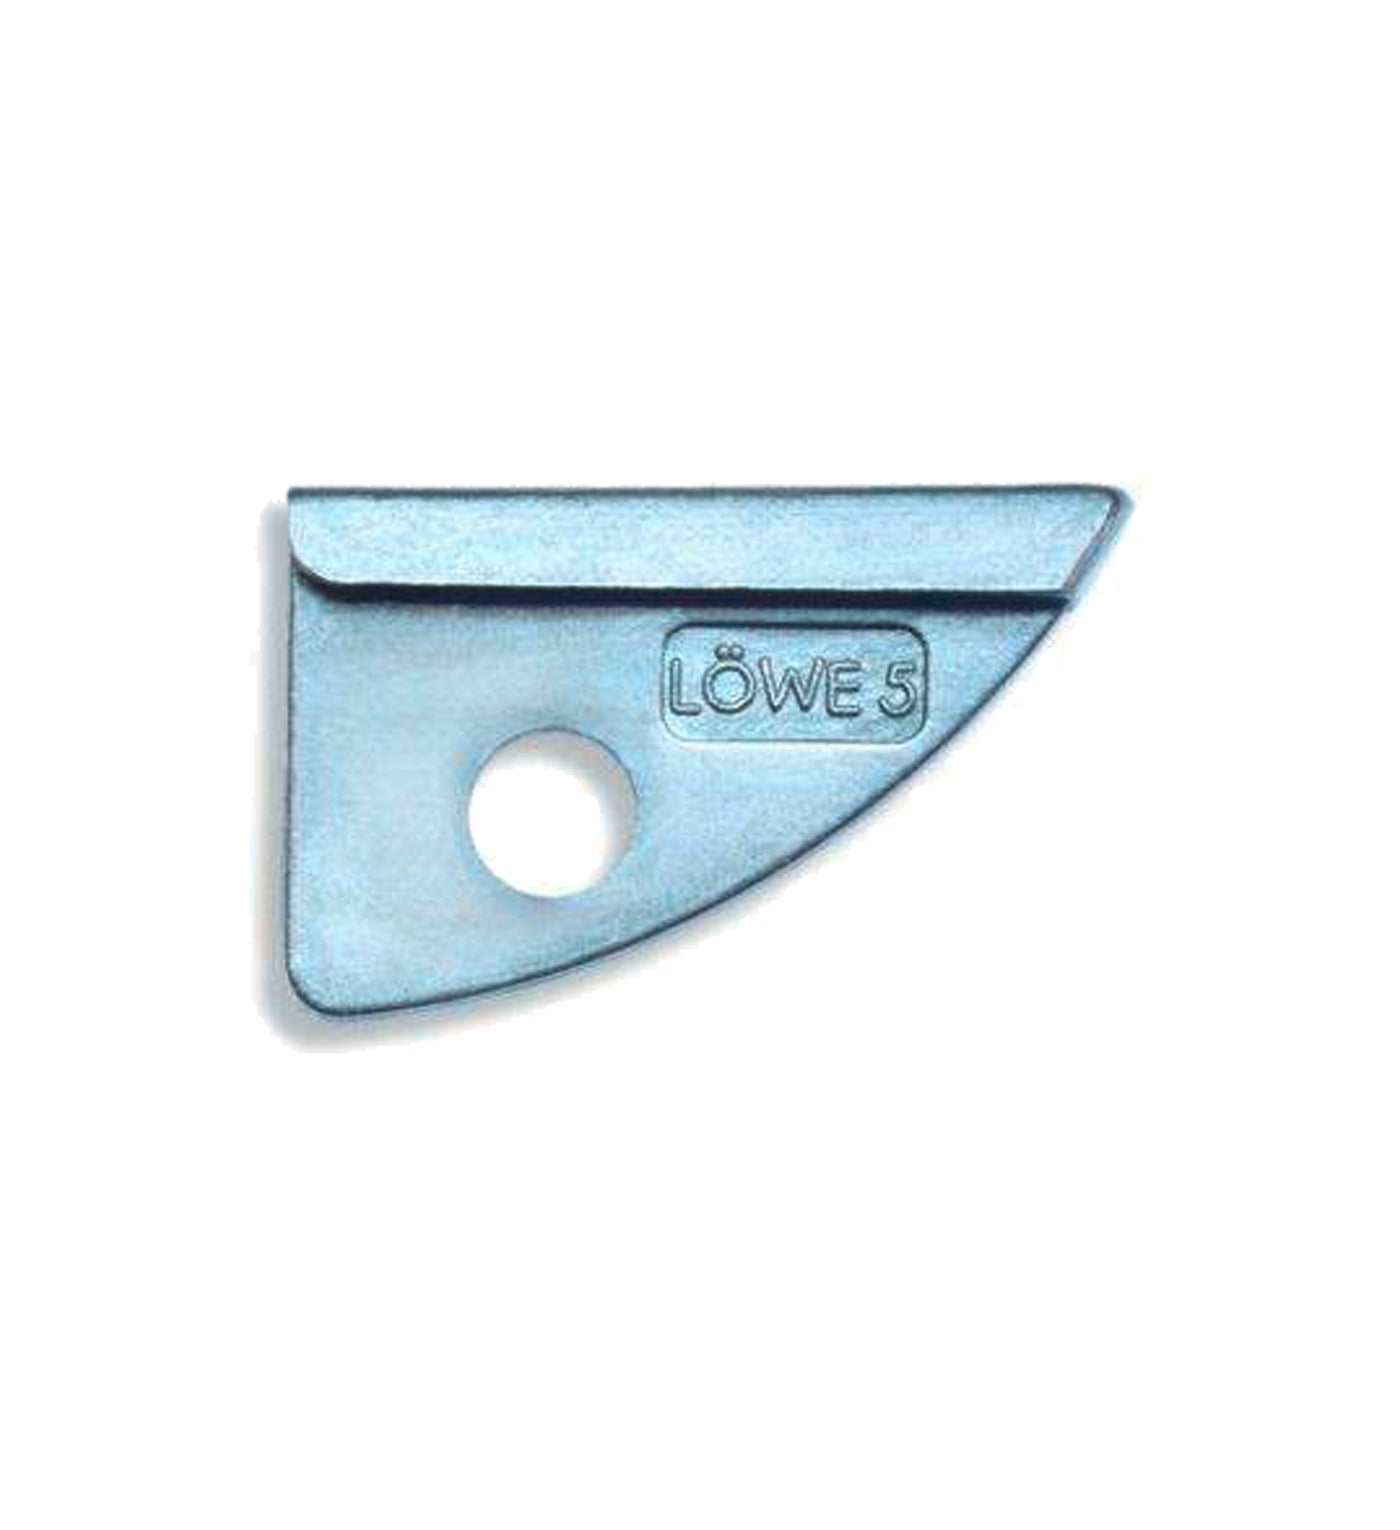 Anvil for LO 5105 Industrial Cutter